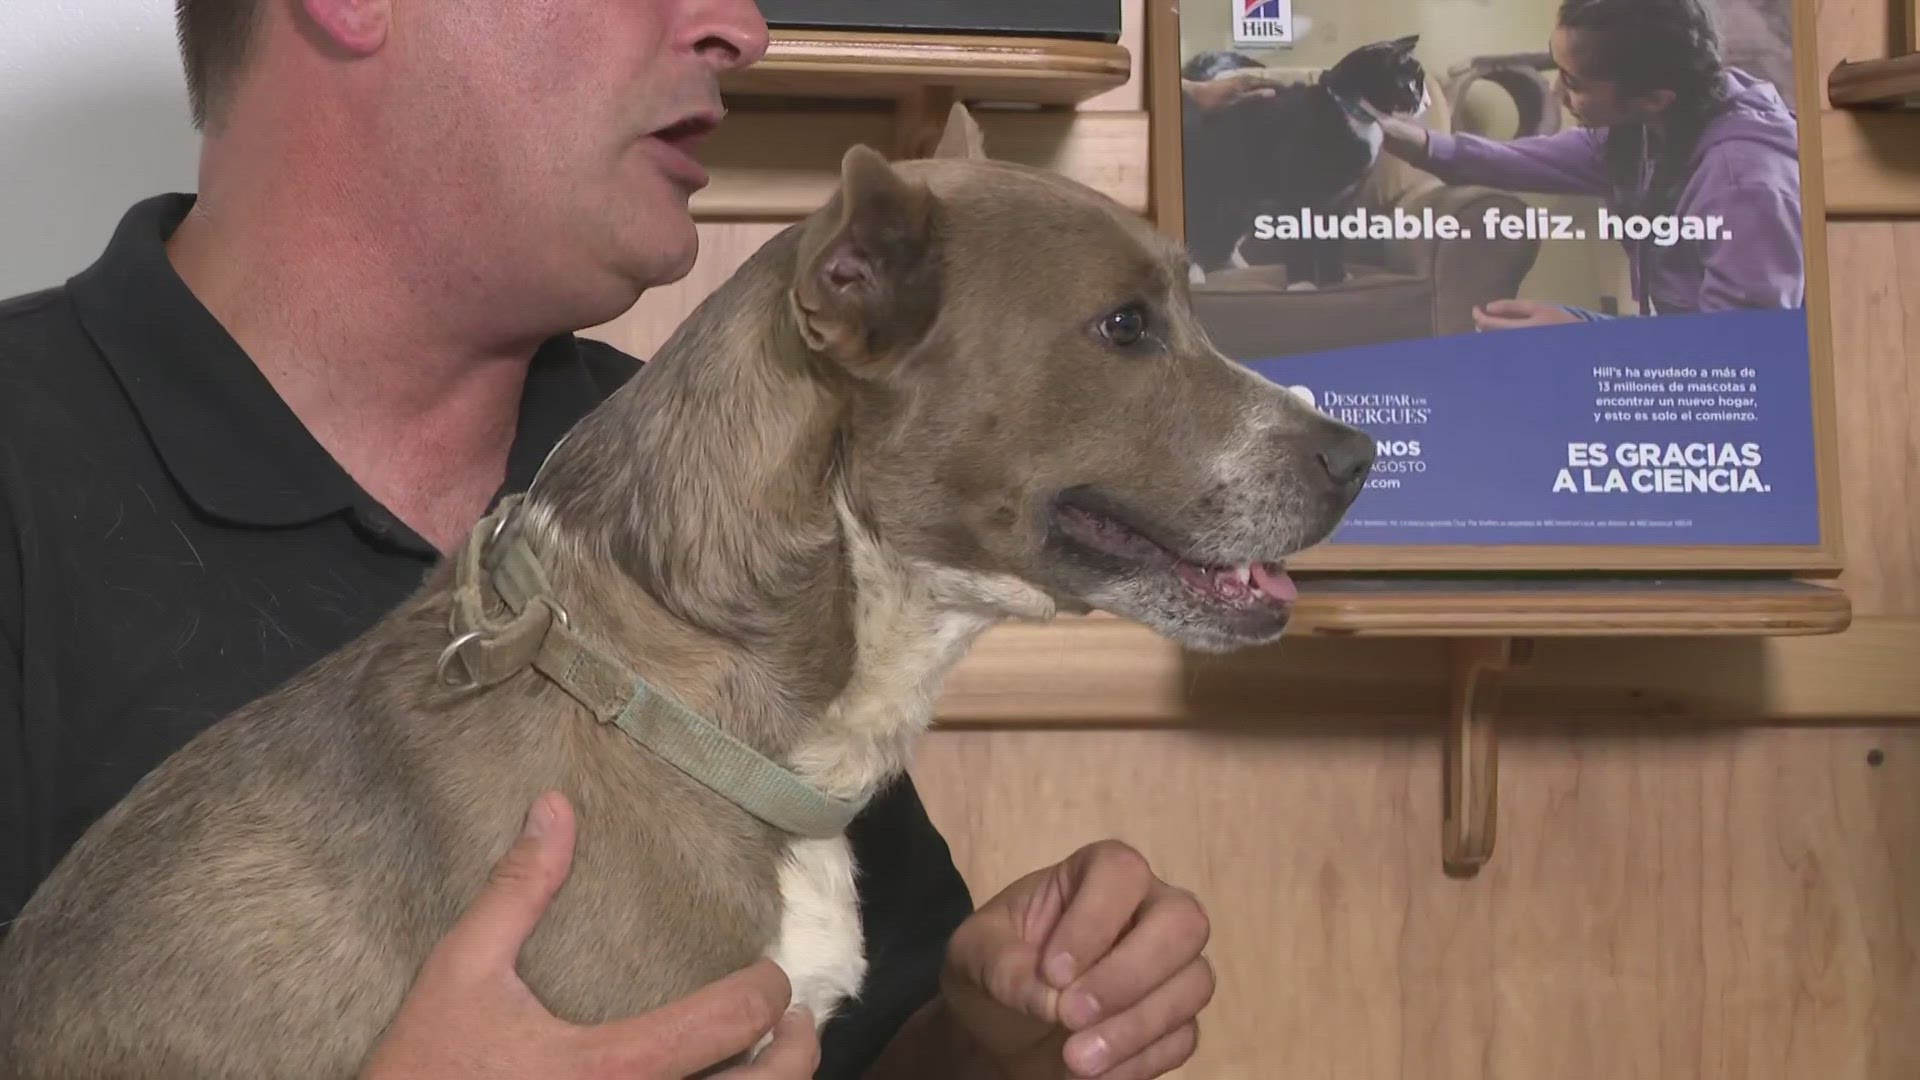 Each day in August, 3News will be featuring a local rescue or shelter participating in the campaign.